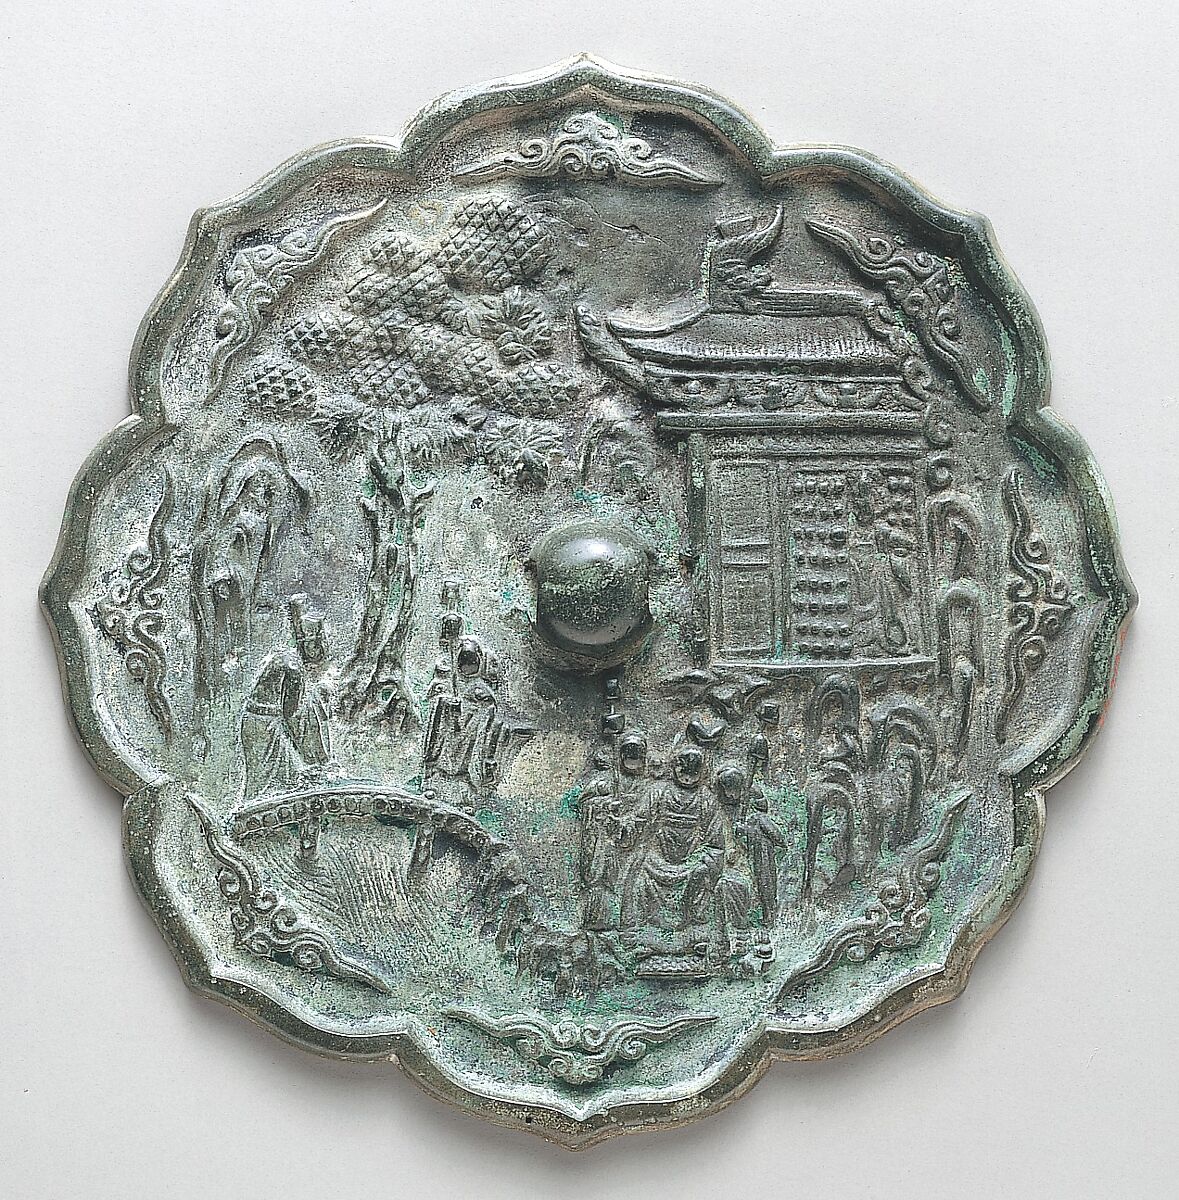 Mirror decorated with figures in a landscape, Bronze, Korea 